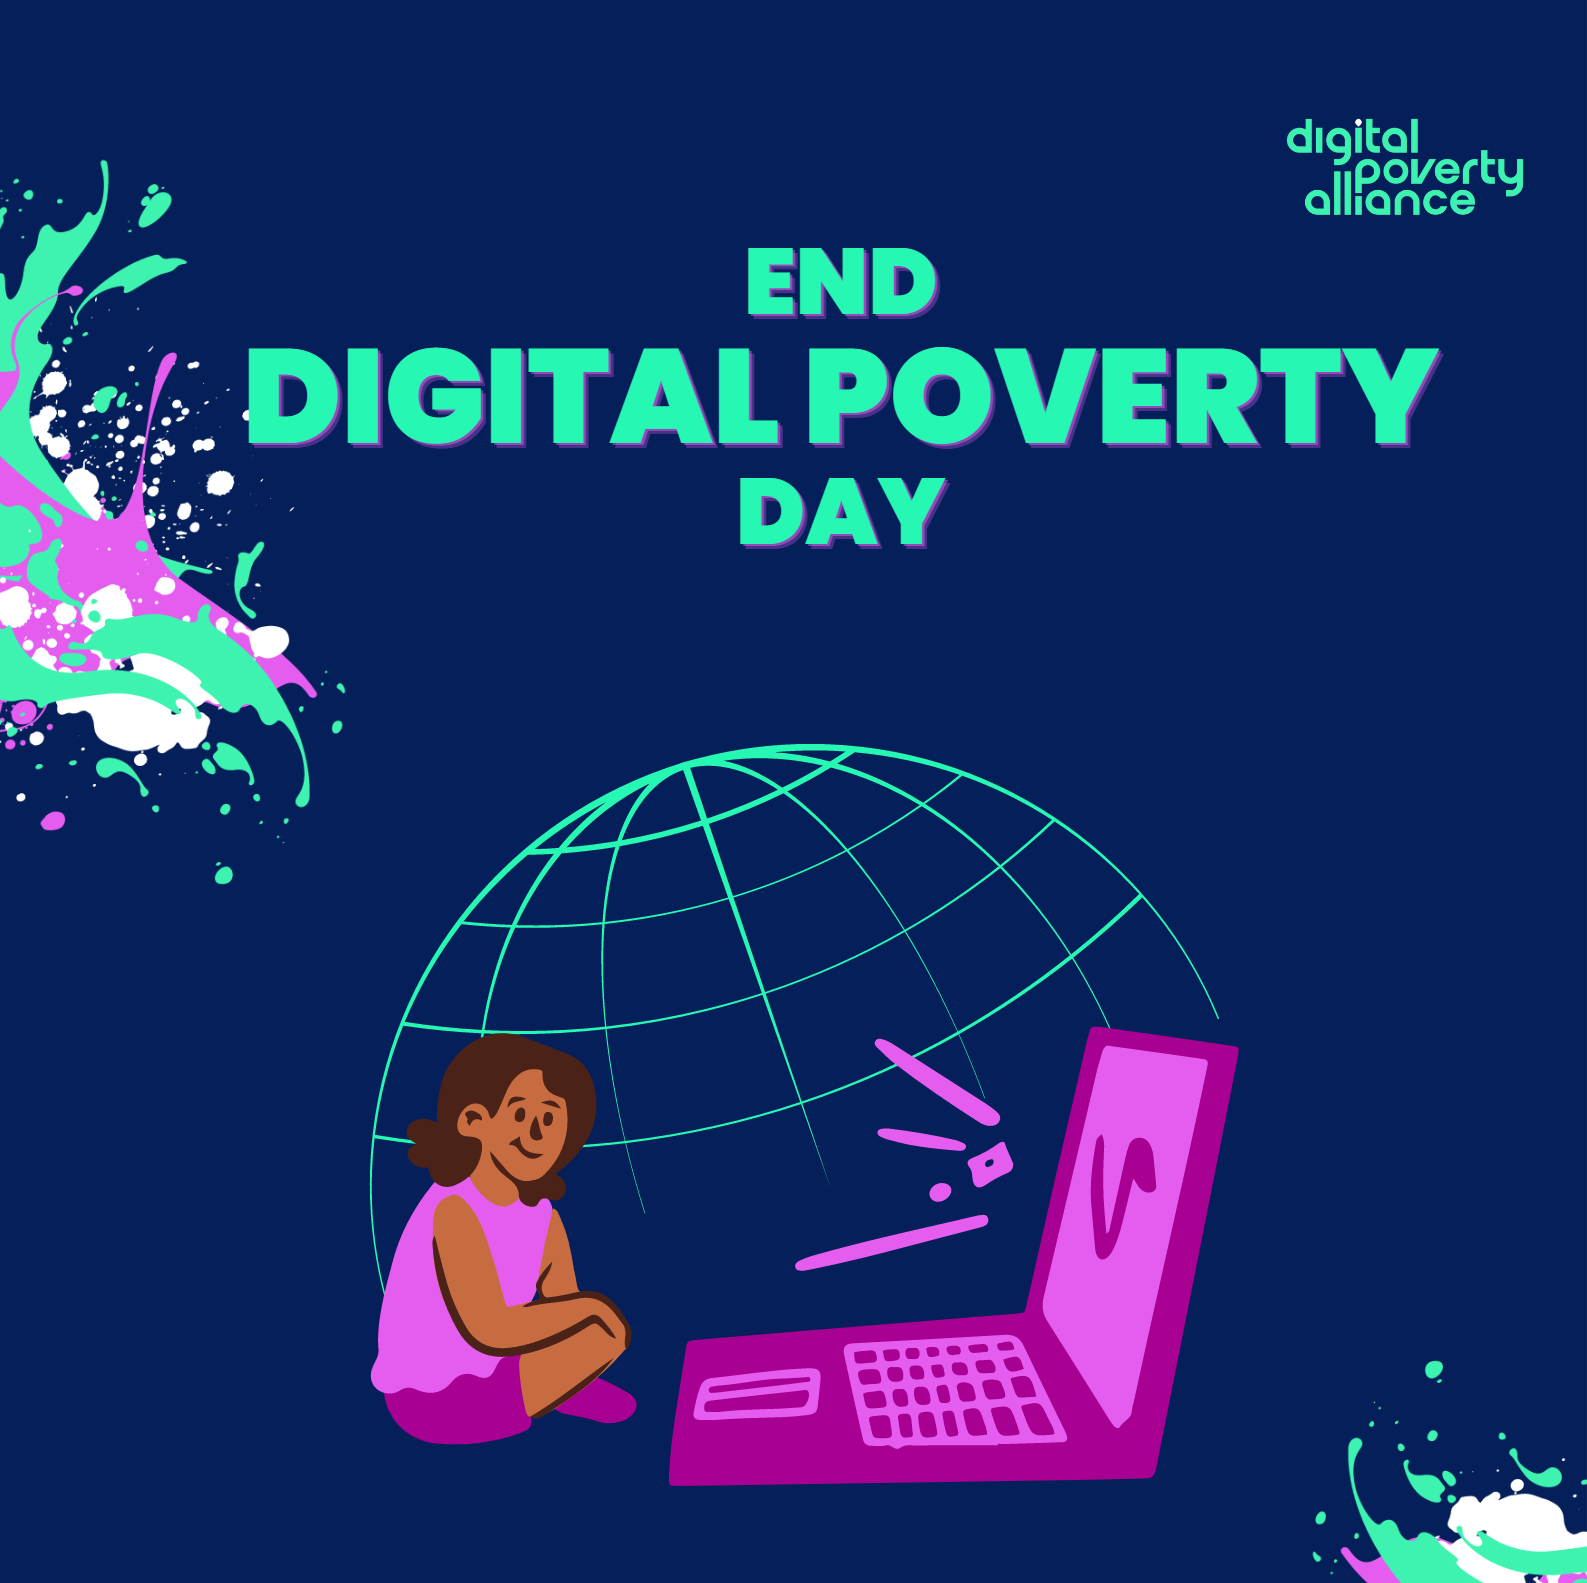 End digital poverty day